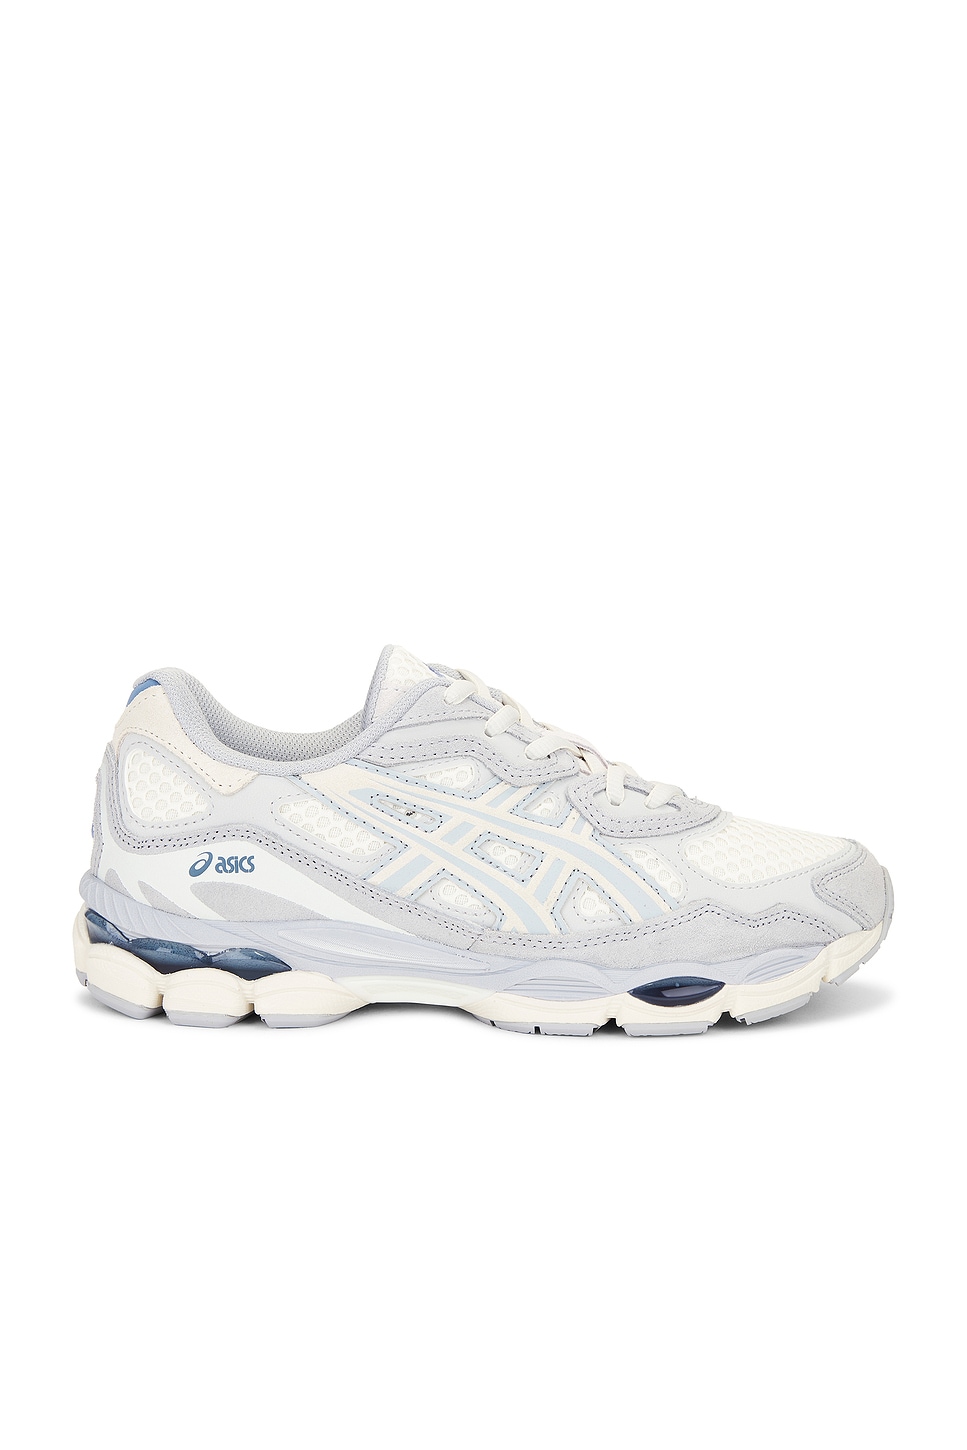 Image 1 of Asics Gel-Nyc in Ivory & Mid Grey